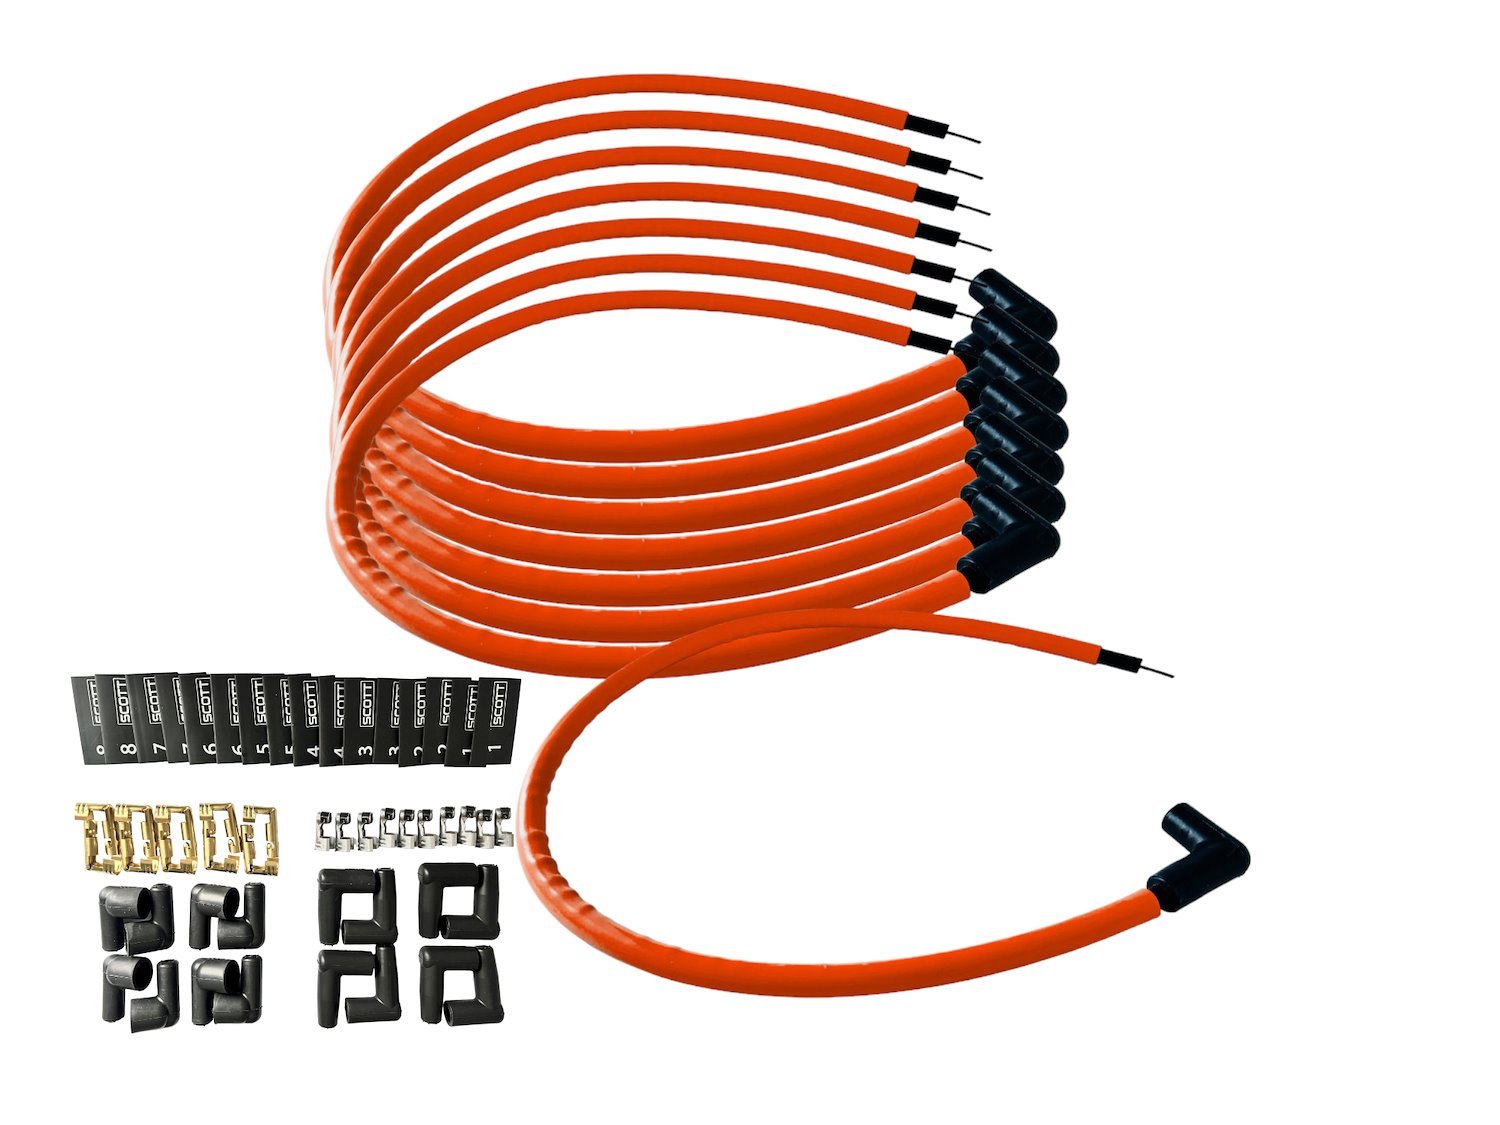 SPW-CH-K90-9 DIY High-Performance Silicone-Sleeved Spark Plug Wire Set, 90-Degree Boot [Fluorescent Orange]